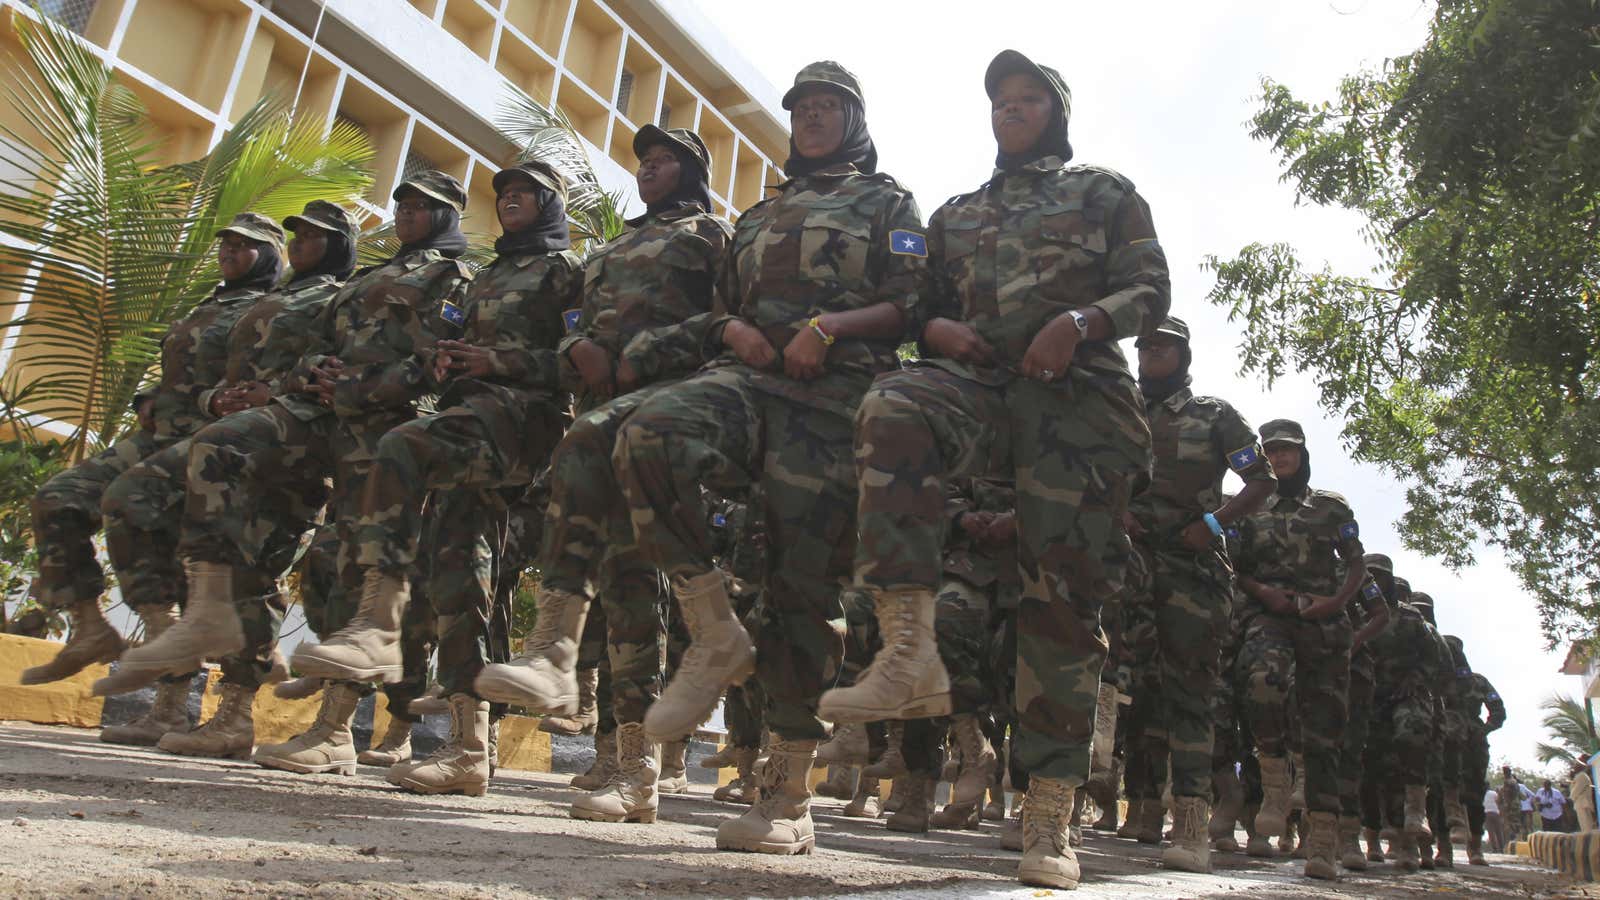 Dozens of troops are headed to help fight al-Shabab.